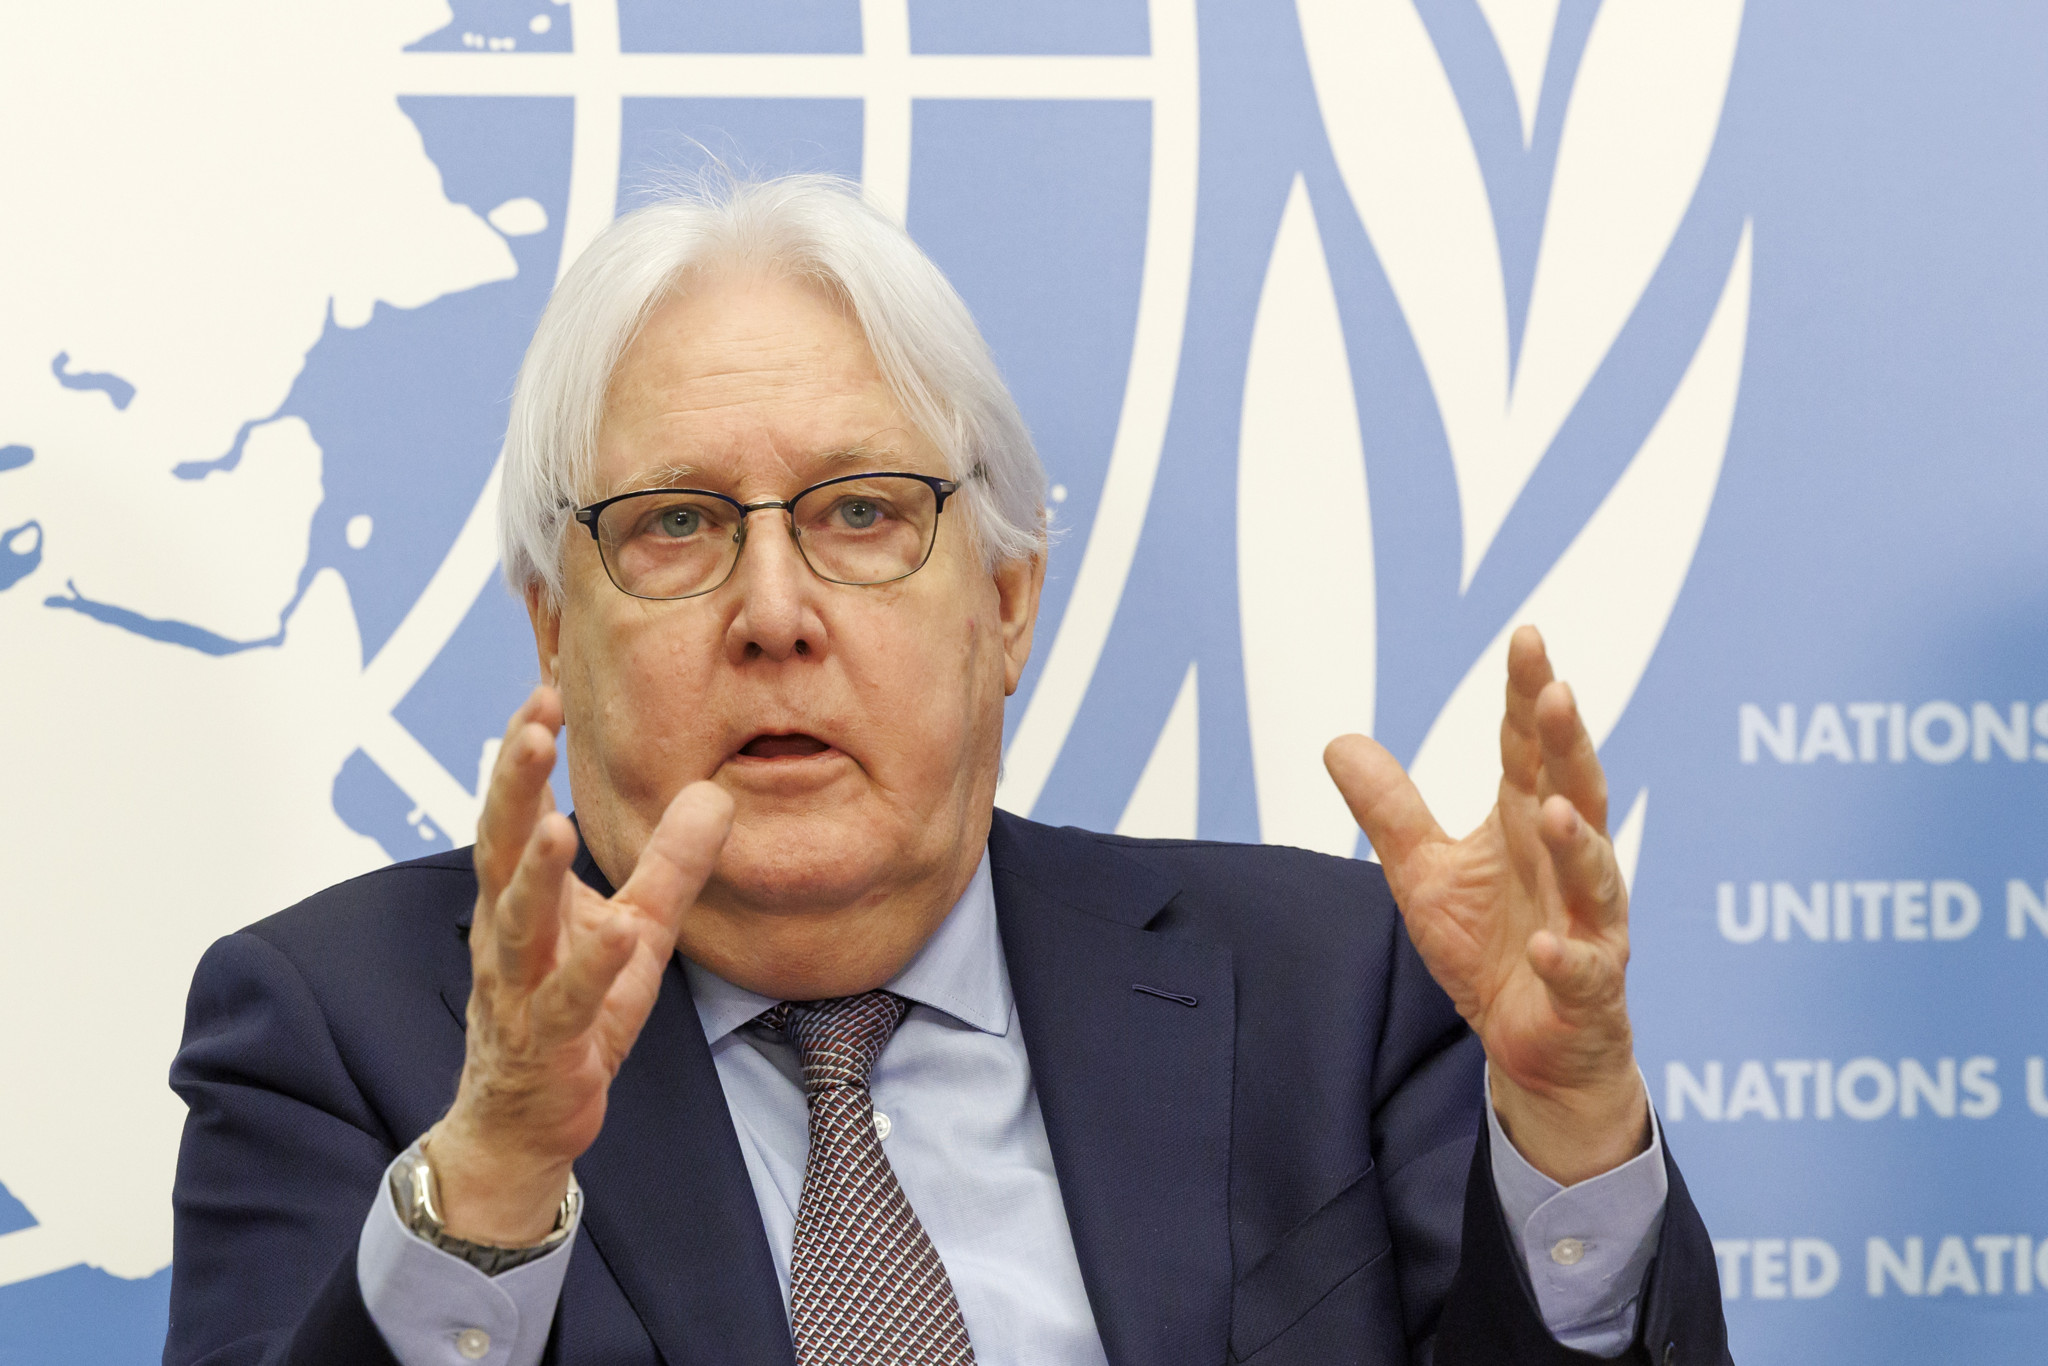 Martin Griffiths, Under-Secretary-General for Humanitarian Affairs and Emergency Relief Coordinator, talks to media during a press conference, prior a High-Level Pledging Event for the Humanitarian Crisis in Yemen, at the European headquarters of the United Nations in Geneva, Switzerland, Monday, February 27, 2023. (KEYSTONE/Salvatore Di Nolfi)